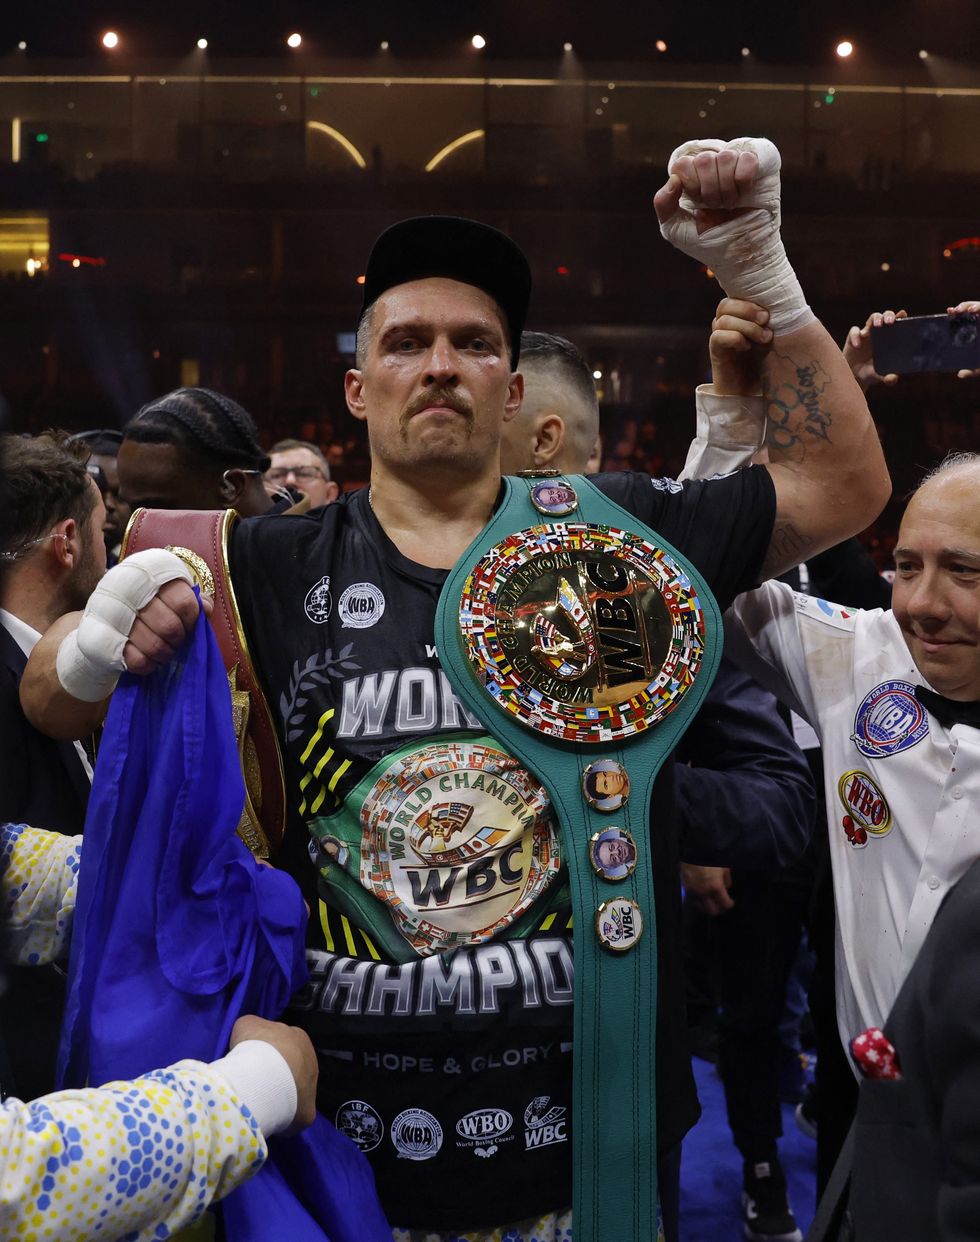 Oleksandr Usyk was visibly emotional after his win